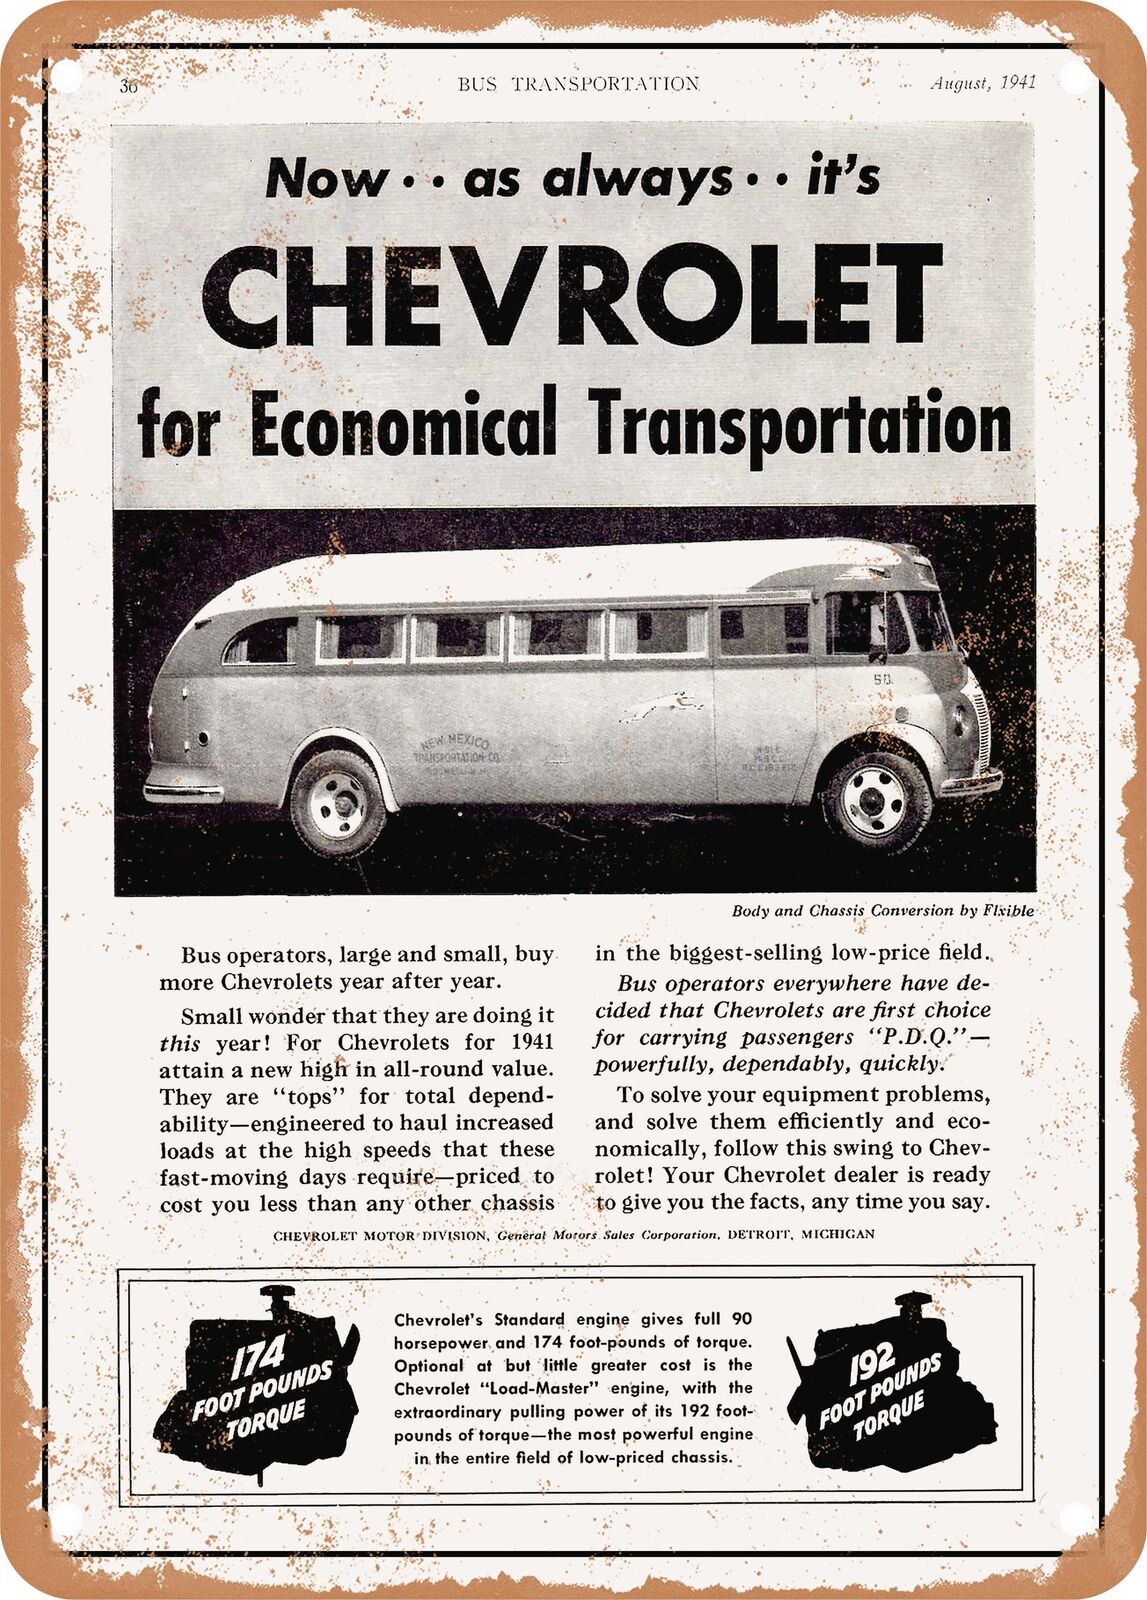 METAL SIGN - 1941 Chevy Bus by Flxible Vintage Ad